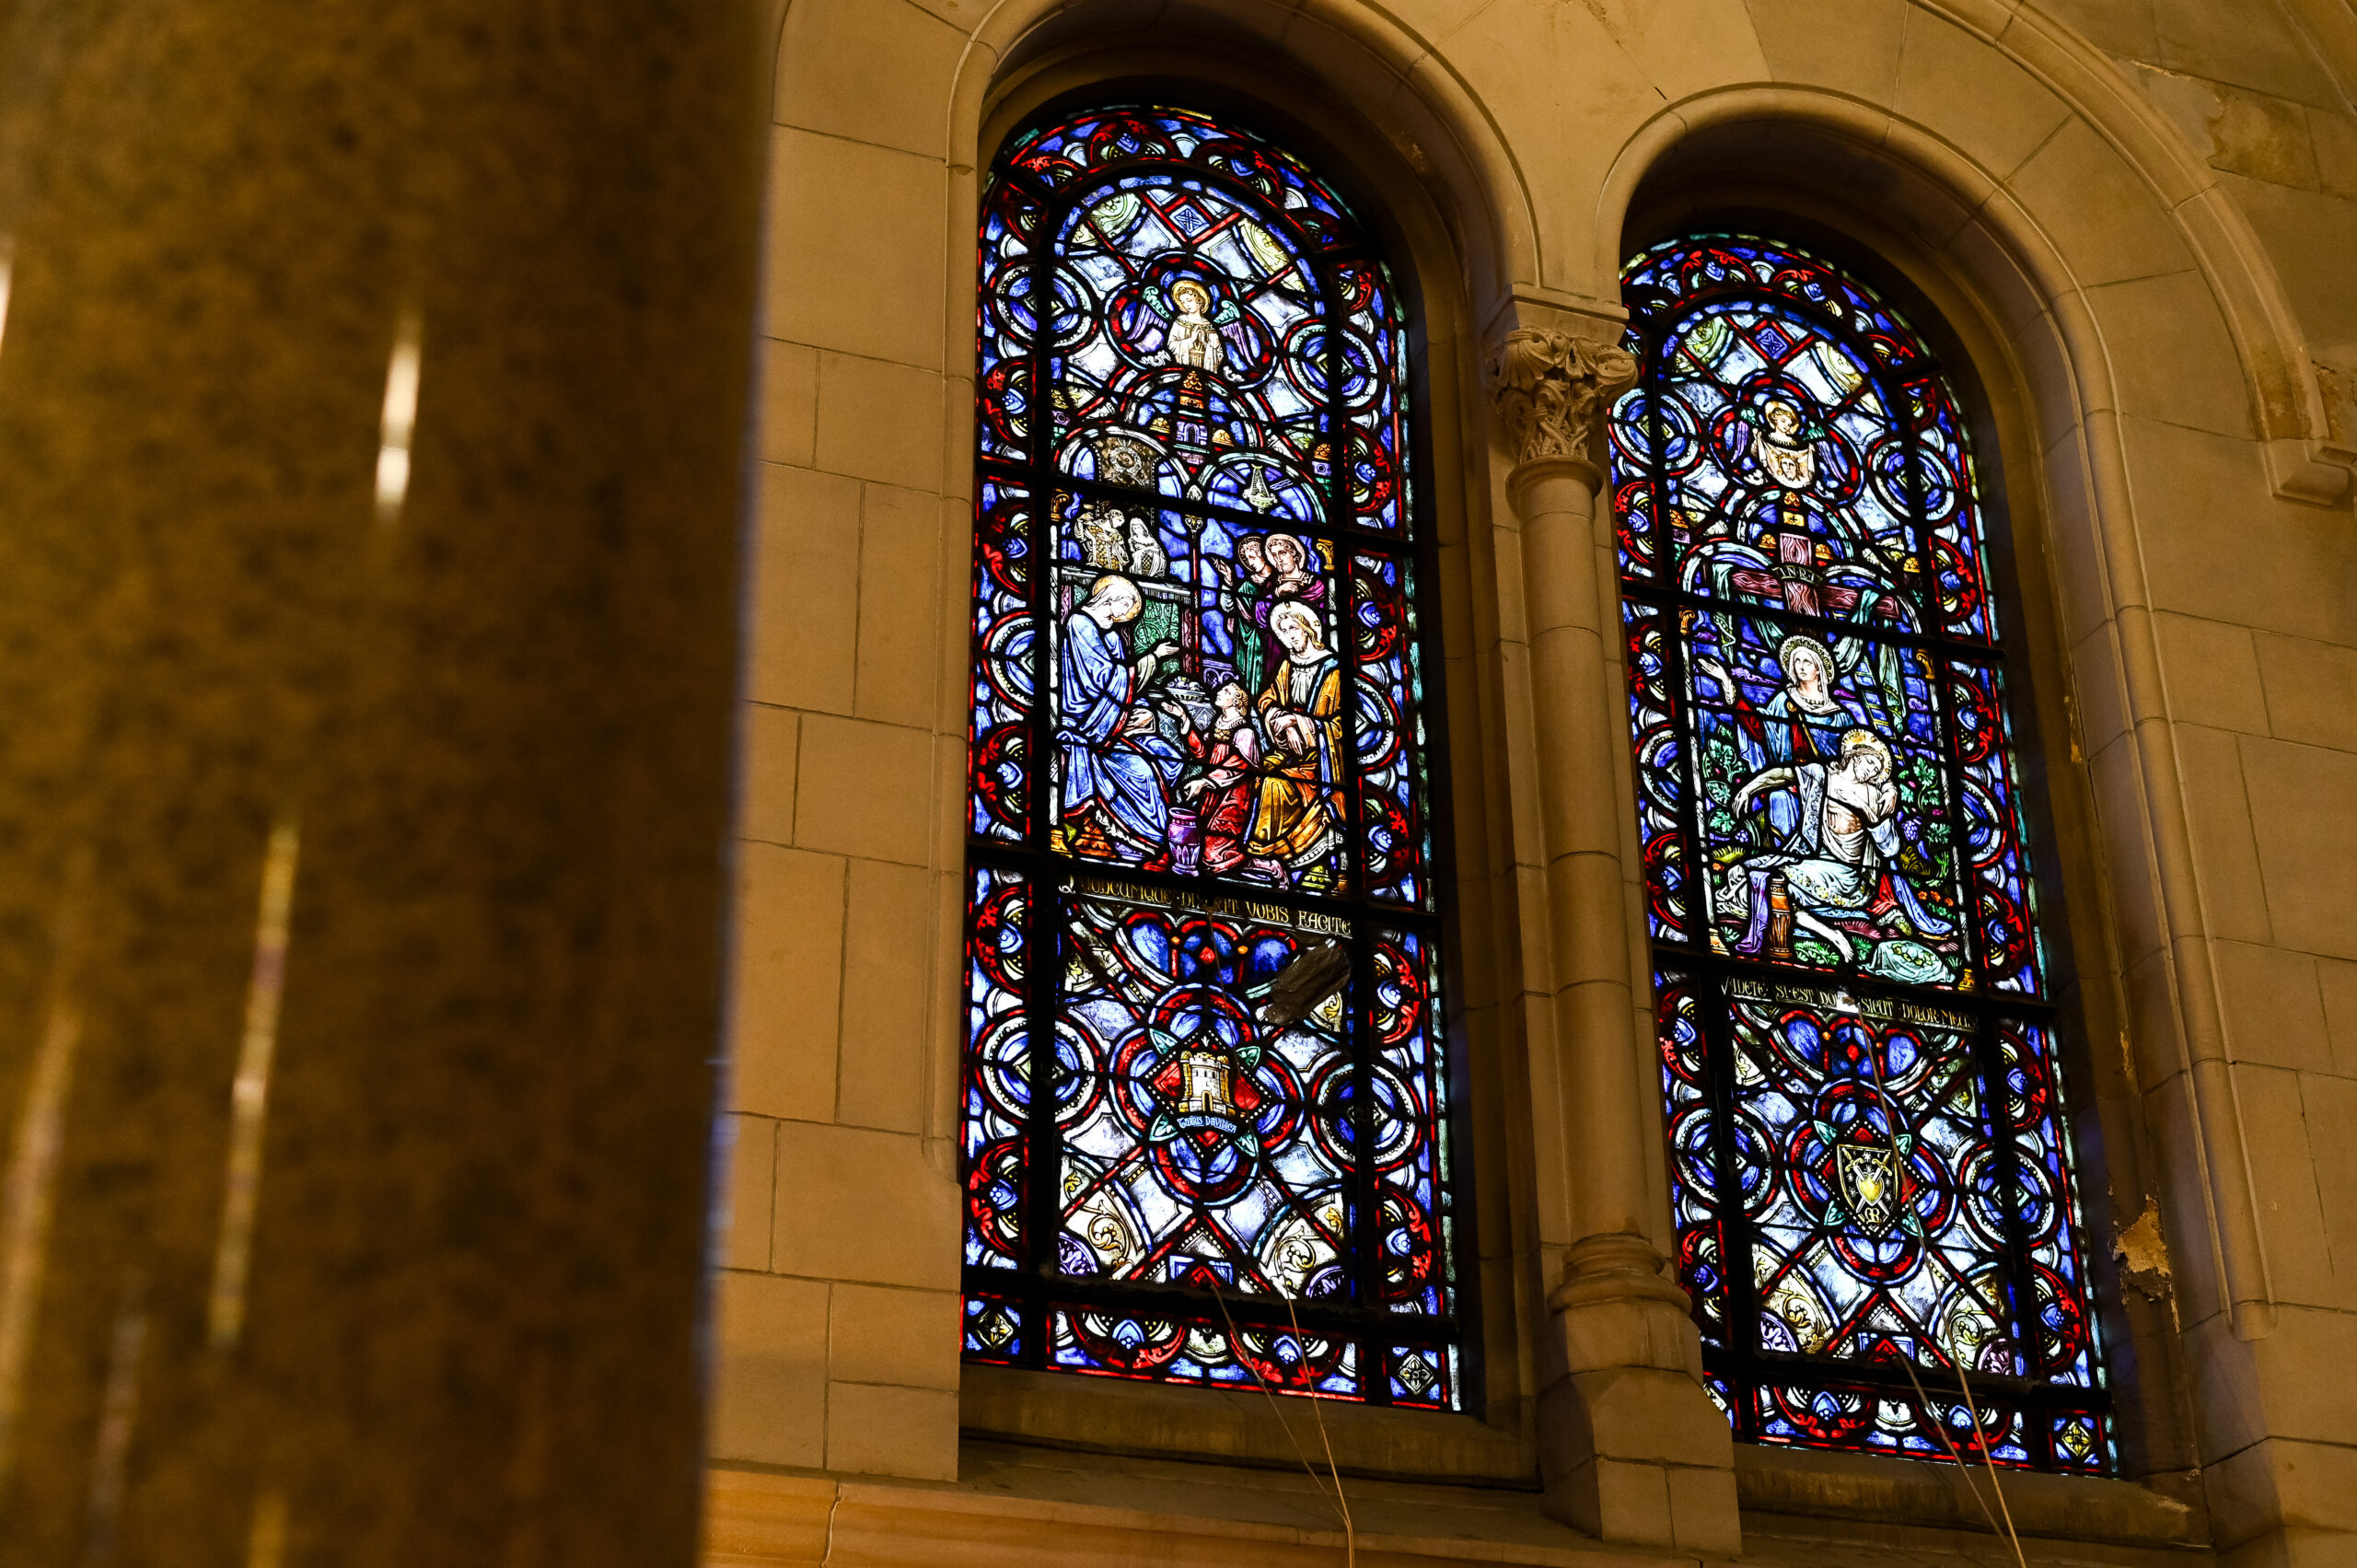 Two ornate stained glass windows in a stone building, illuminated from within, showcasing intricate designs and vibrant colors with religious imagery.